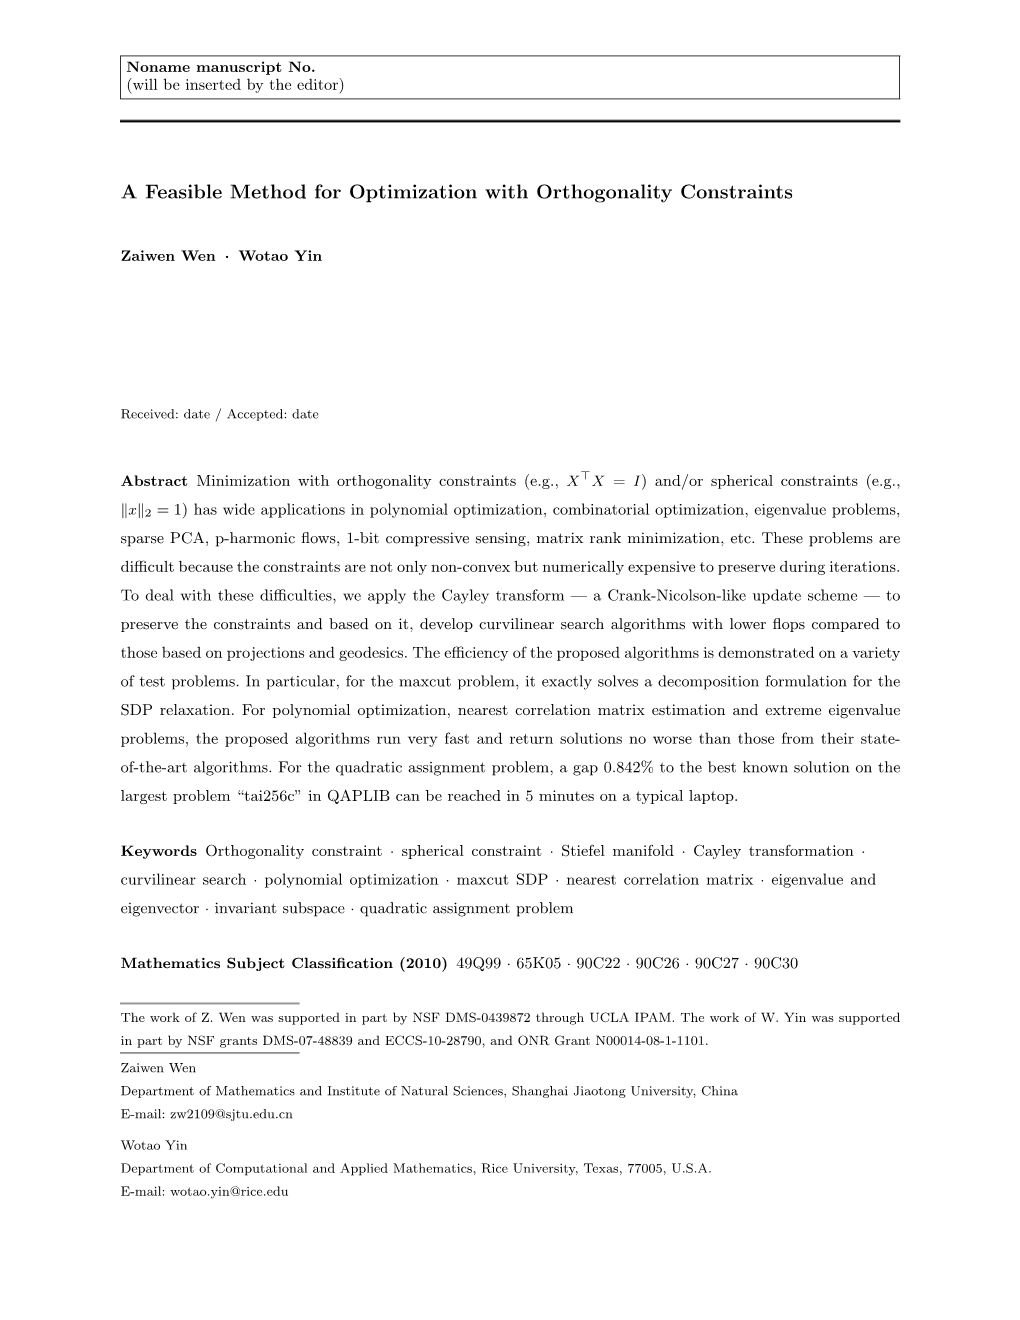 A Feasible Method for Optimization with Orthogonality Constraints